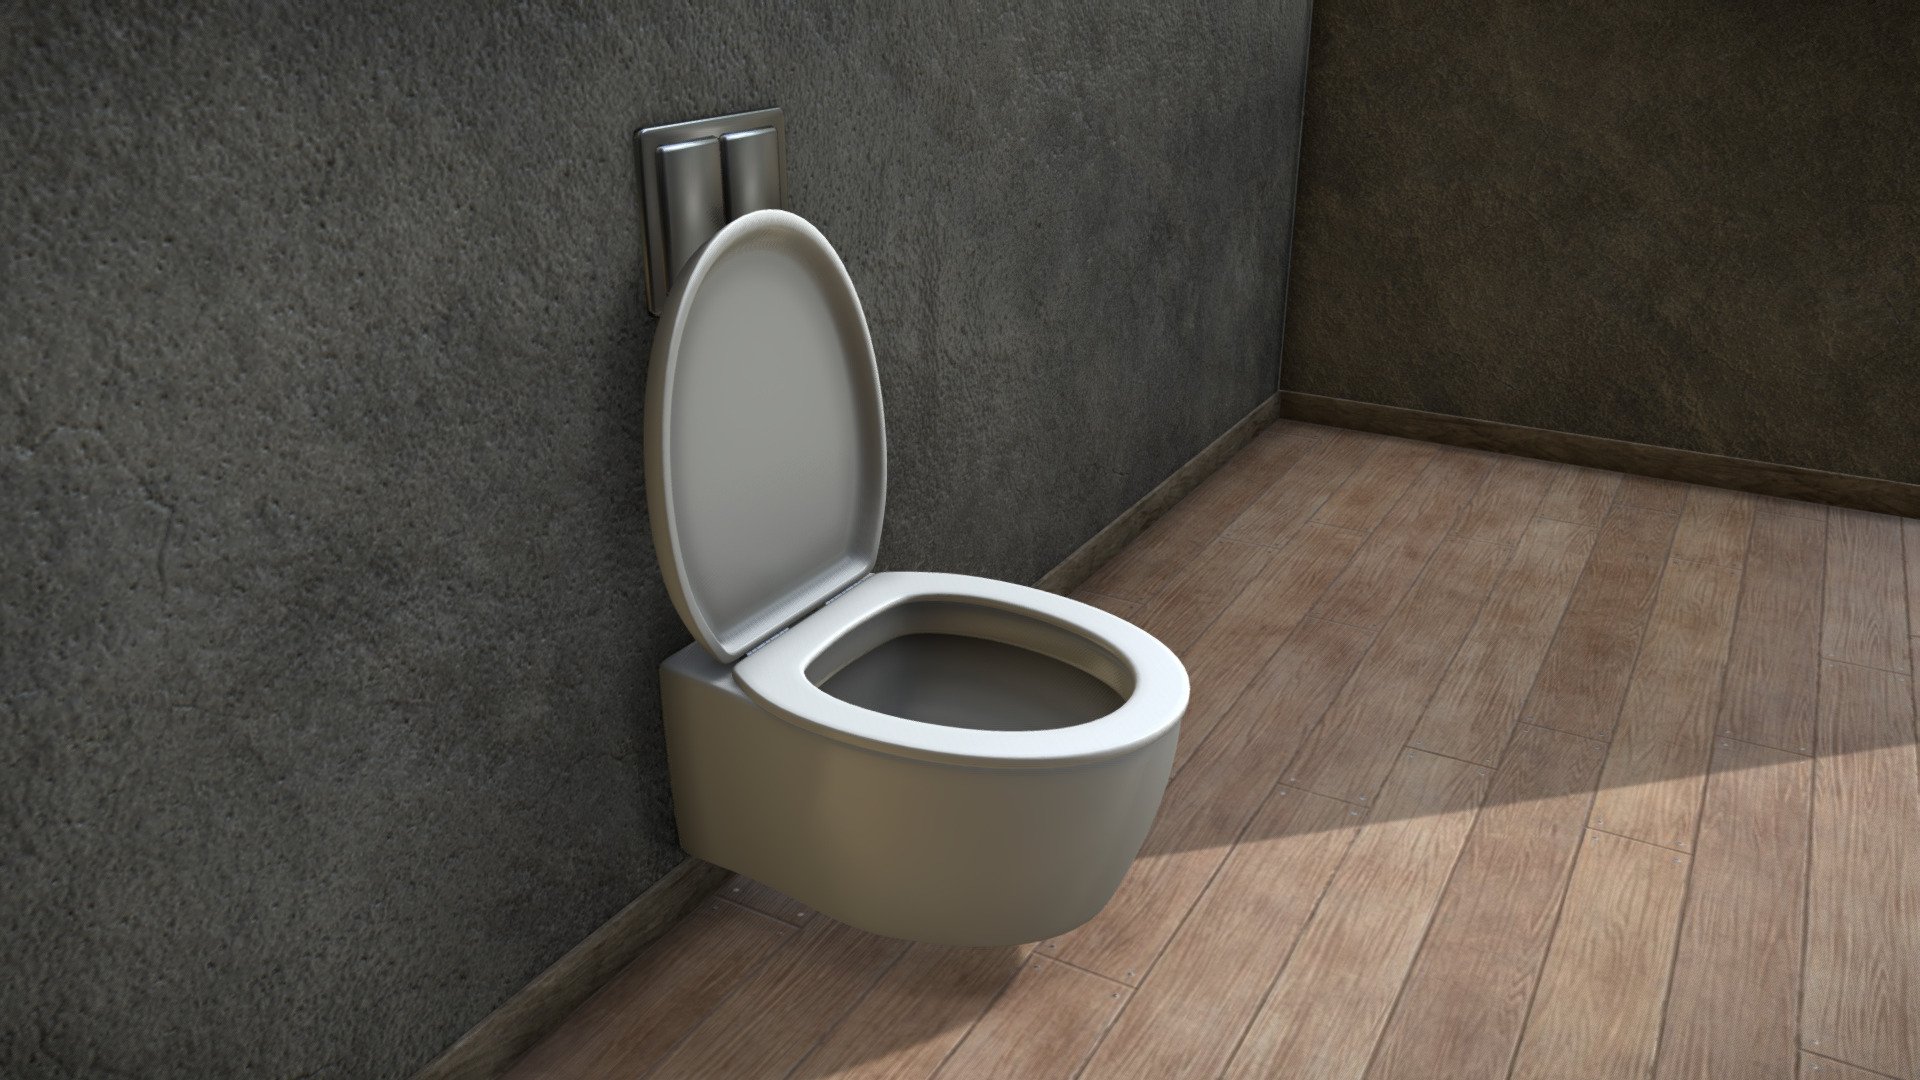 Modern toilet

I modeled and unwraped this toilet in Blender and baked + textured it in Substance Painter 3d model